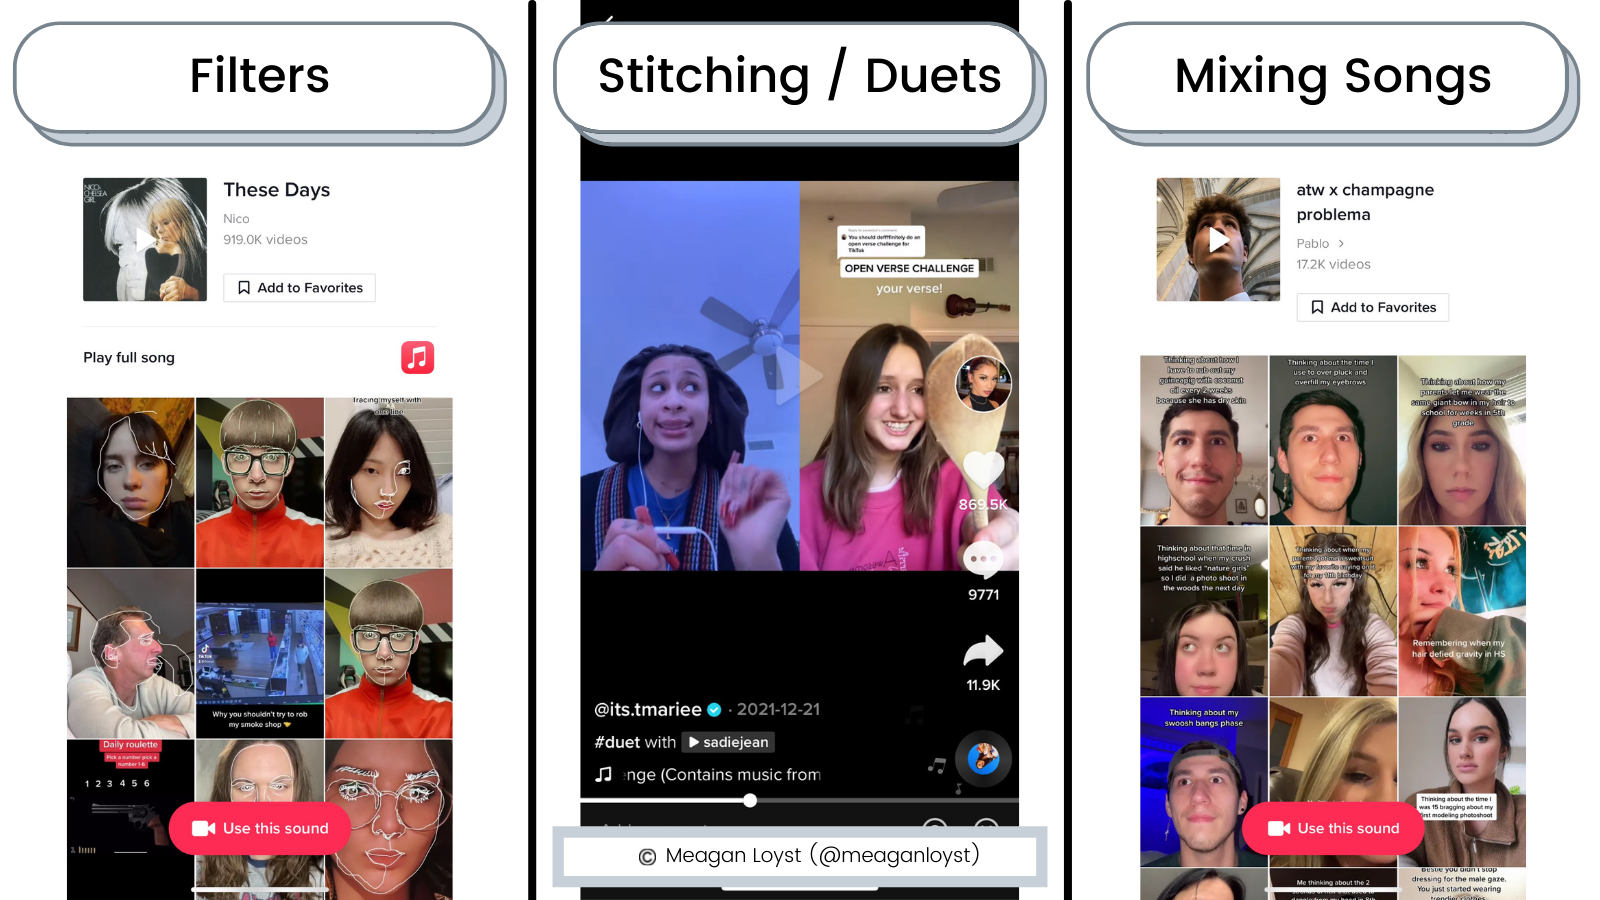 Various ways to empower fans to create alongside trending music on TikTok, many of which are embedded into the product (ie: filters, stitching, etc.)